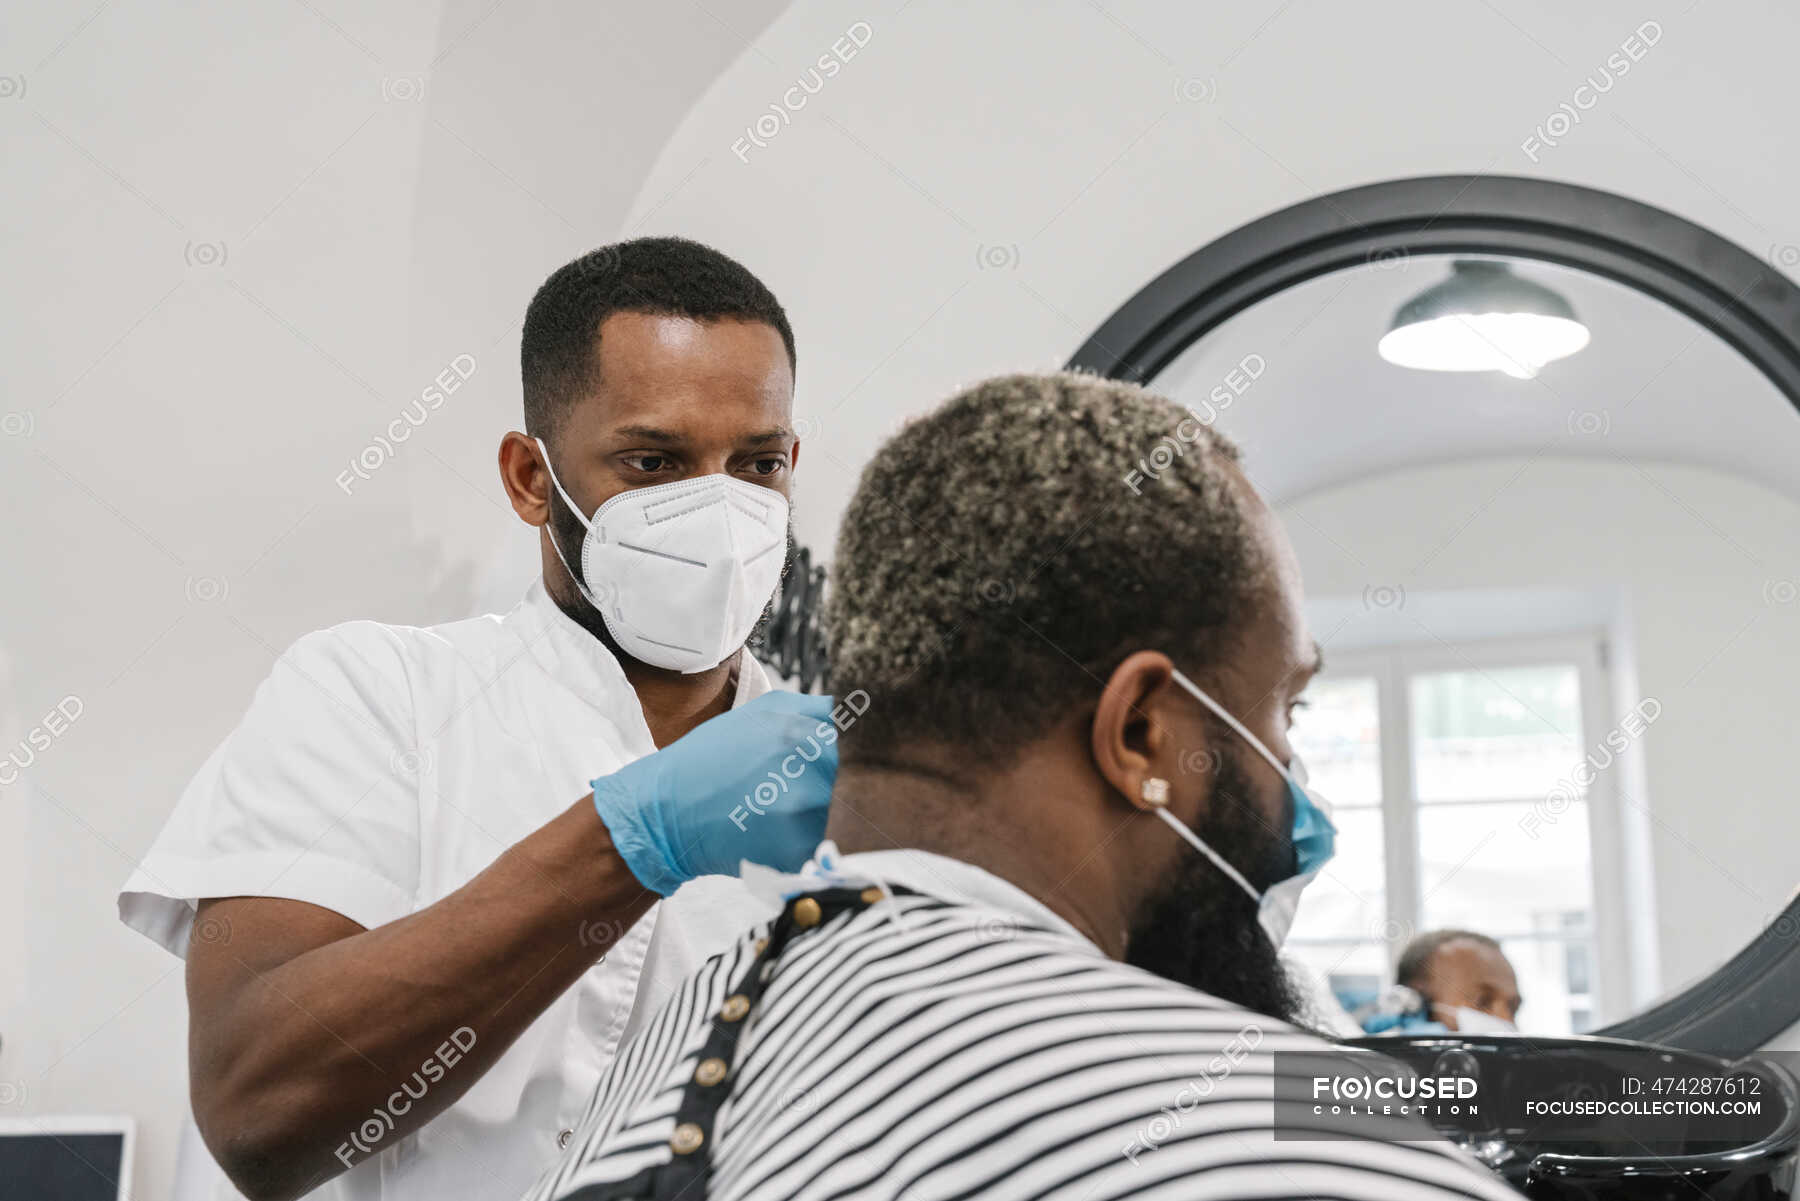 Focused 474287612 Stock Photo Barber Wearing Surgical Mask Gloves 